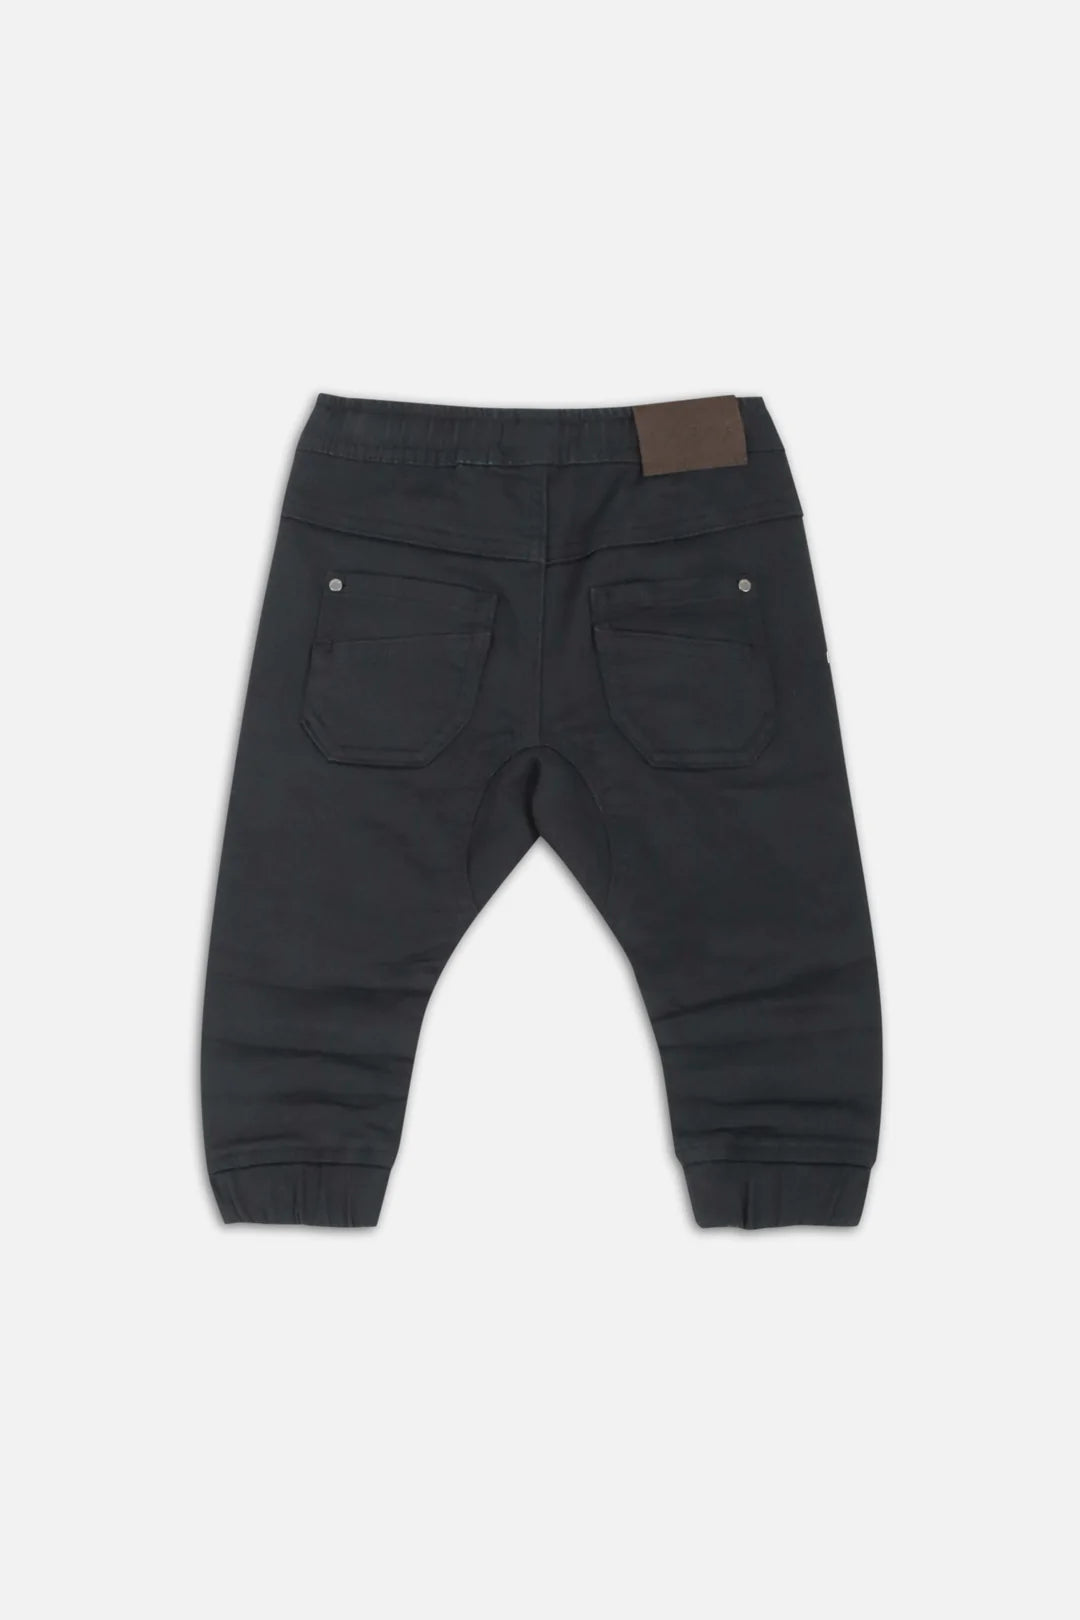 Indie Kids Arched Drifter Pant - Raw (000-2 Years)